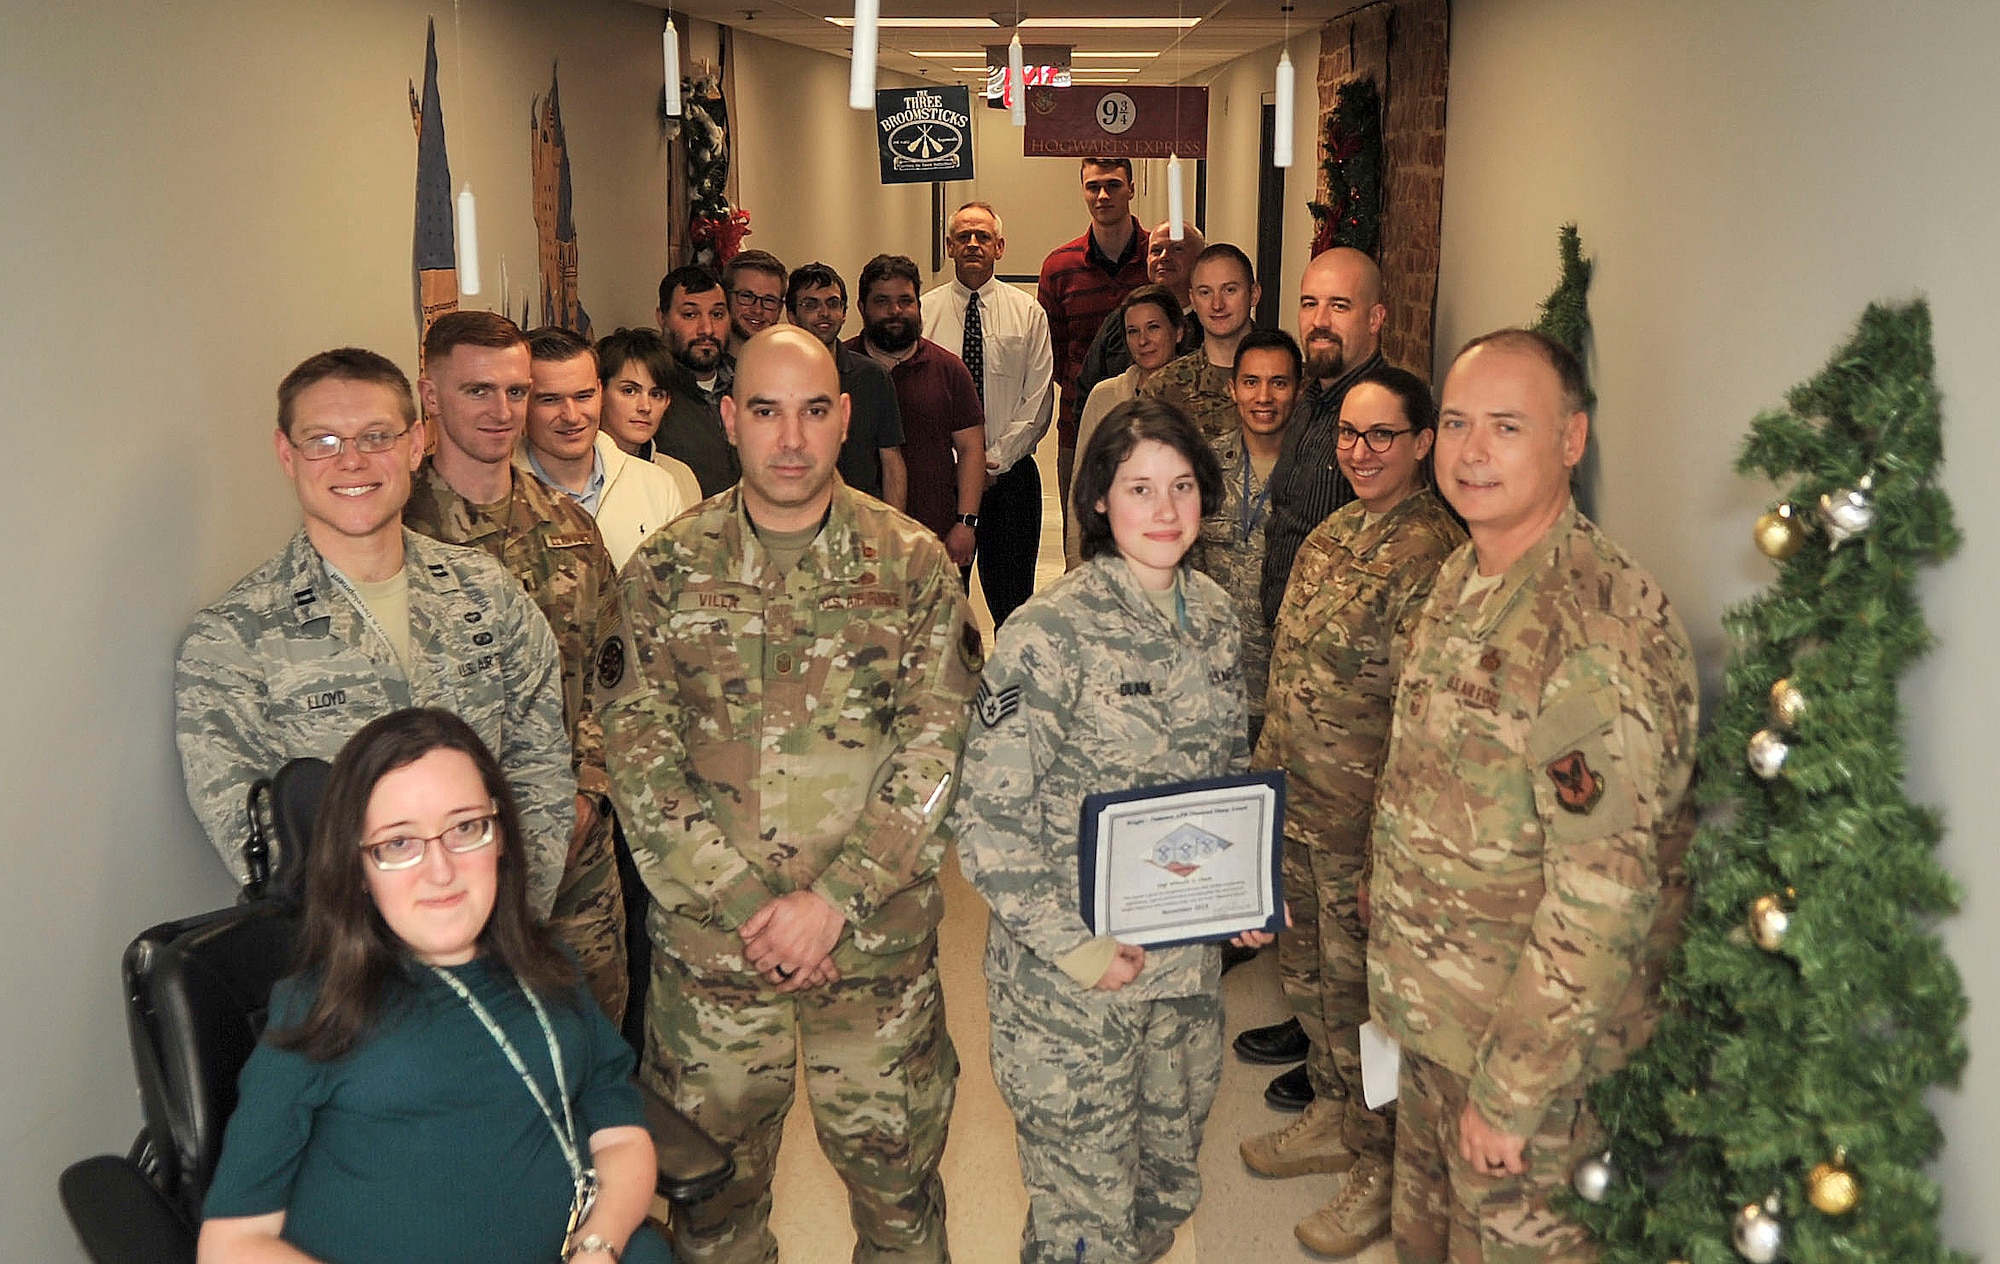 Staff Sgt. Mikayla Dlask, Future Threats Analysis Squadron force modernization analyst, is presented with the Diamond Sharp Award by First Sgts Senior Master Sgt. William Schipper and Juan Villa at the National Air and Space Intelligence Center on Wright-Patterson Air Force Base, Ohio, Dec. 18, 2019. The Diamond Sharp Award recognizes Airmen who have actively demonstrated their commitment to Air Force values or have gone above and beyond in helping others. (U.S. Air Force photos by Staff Sgt. Seth Stang)